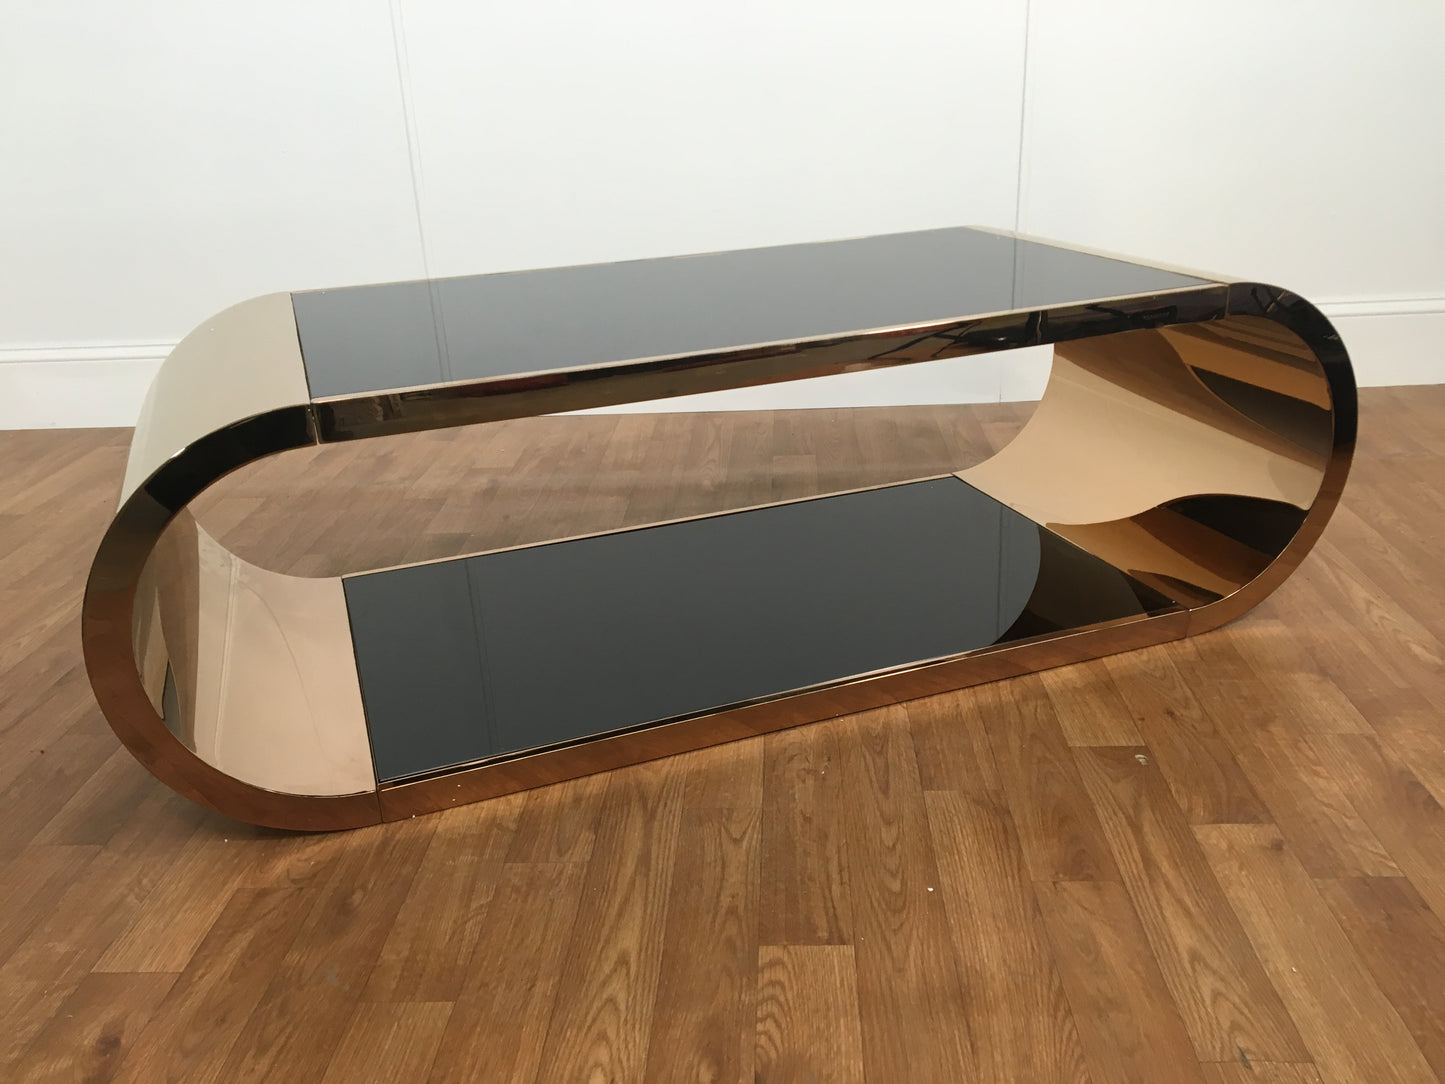 BRONZE AND BLACK GLASS COFFEE TABLE